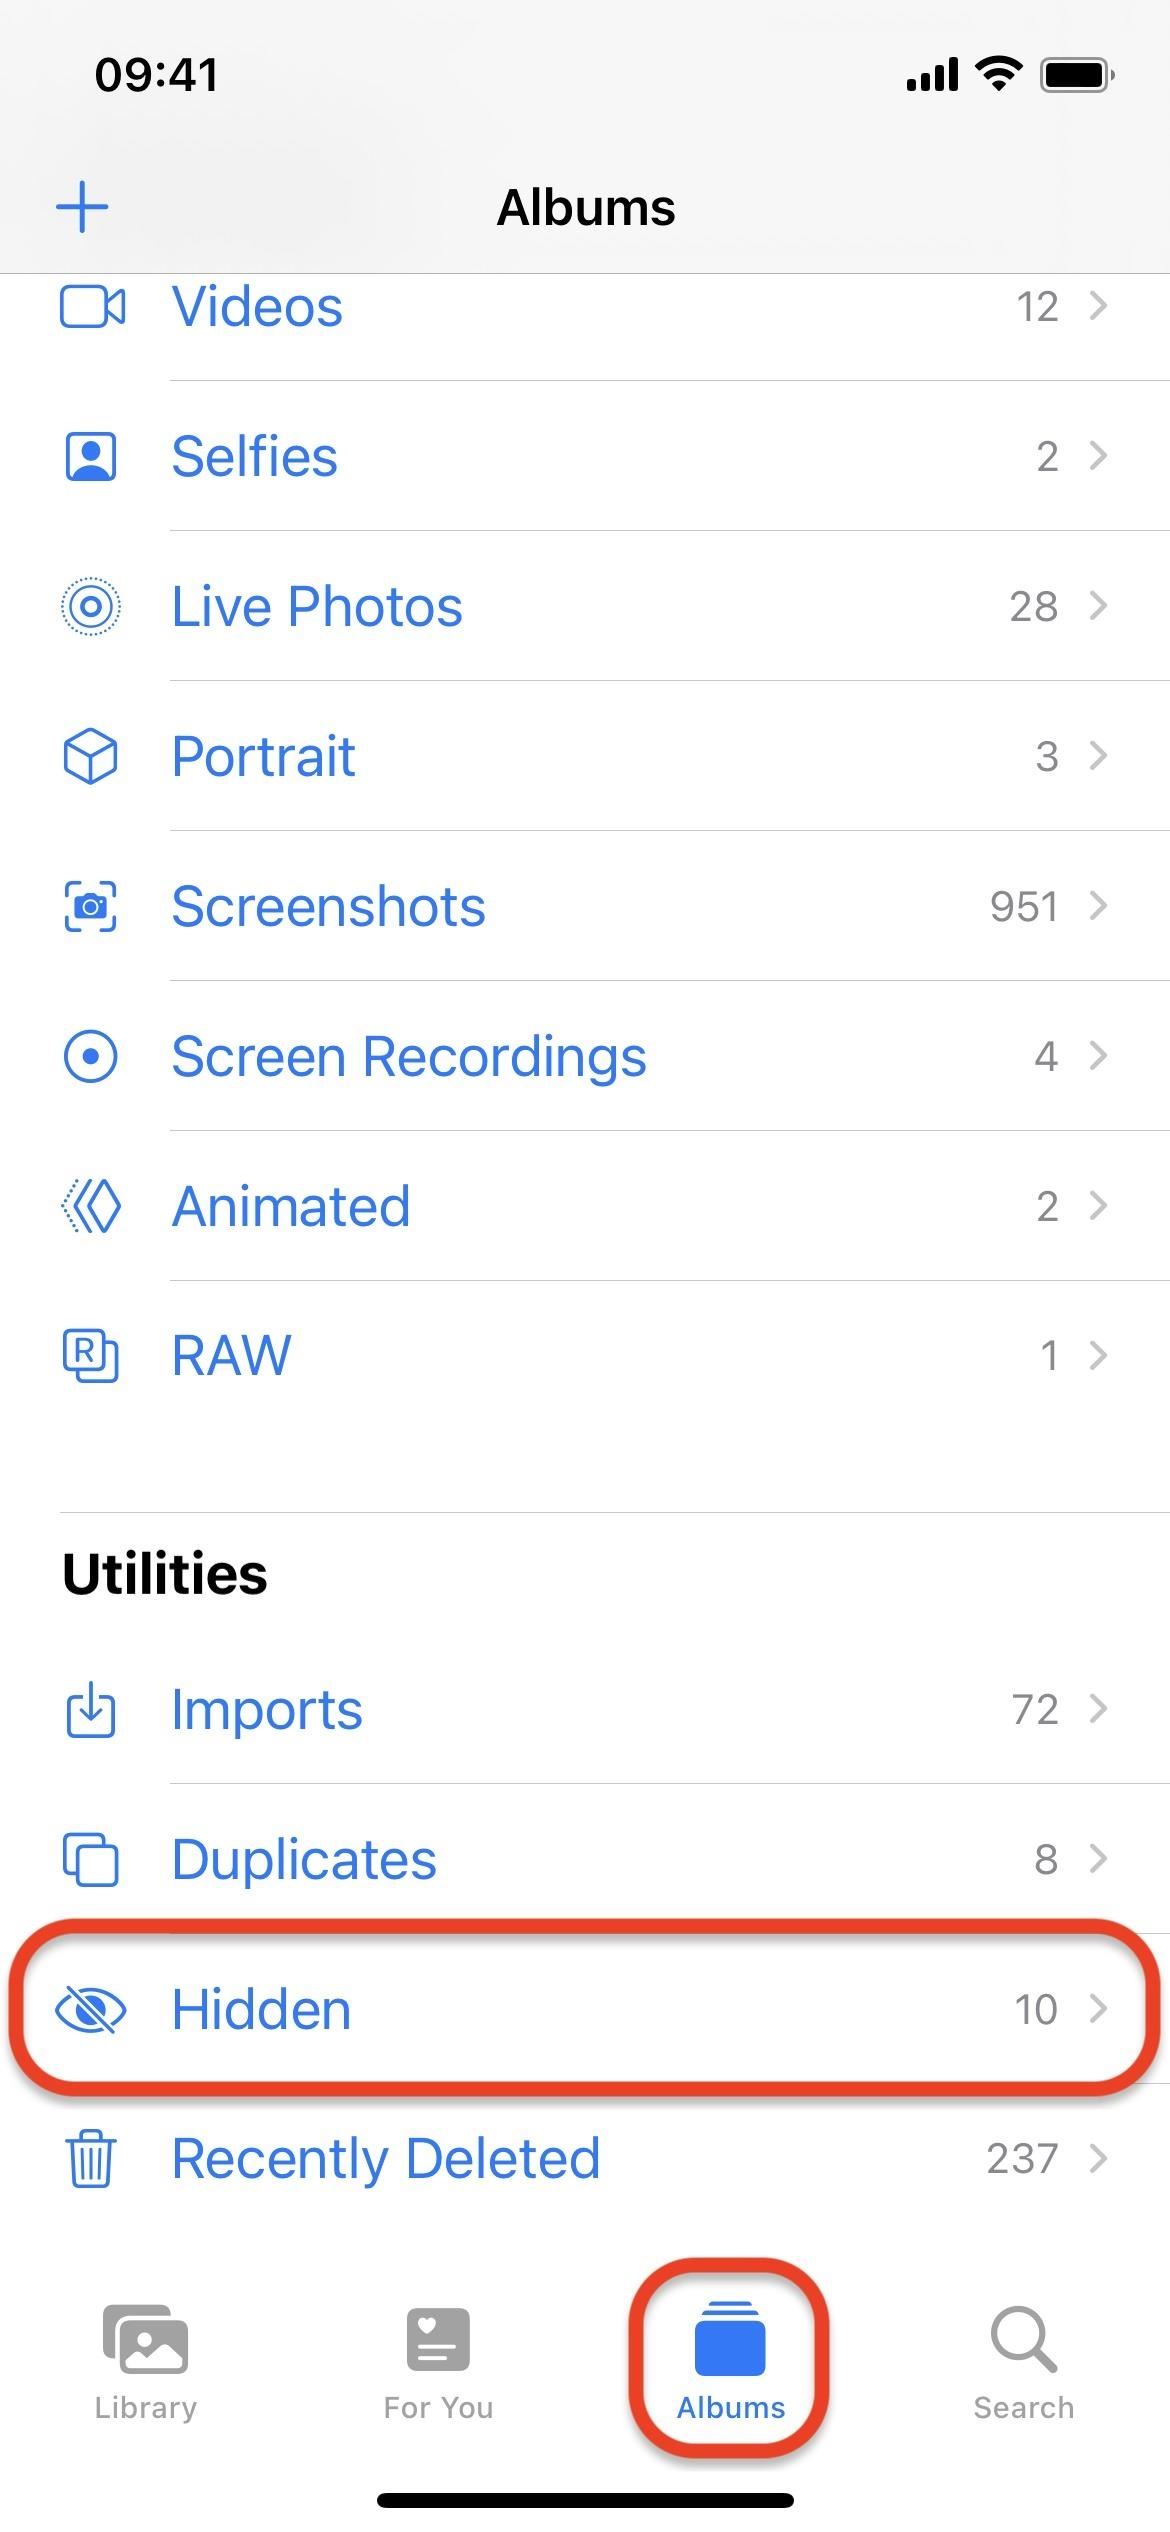 The low profile and most important photo feature that you need to implement right now on your iPhone